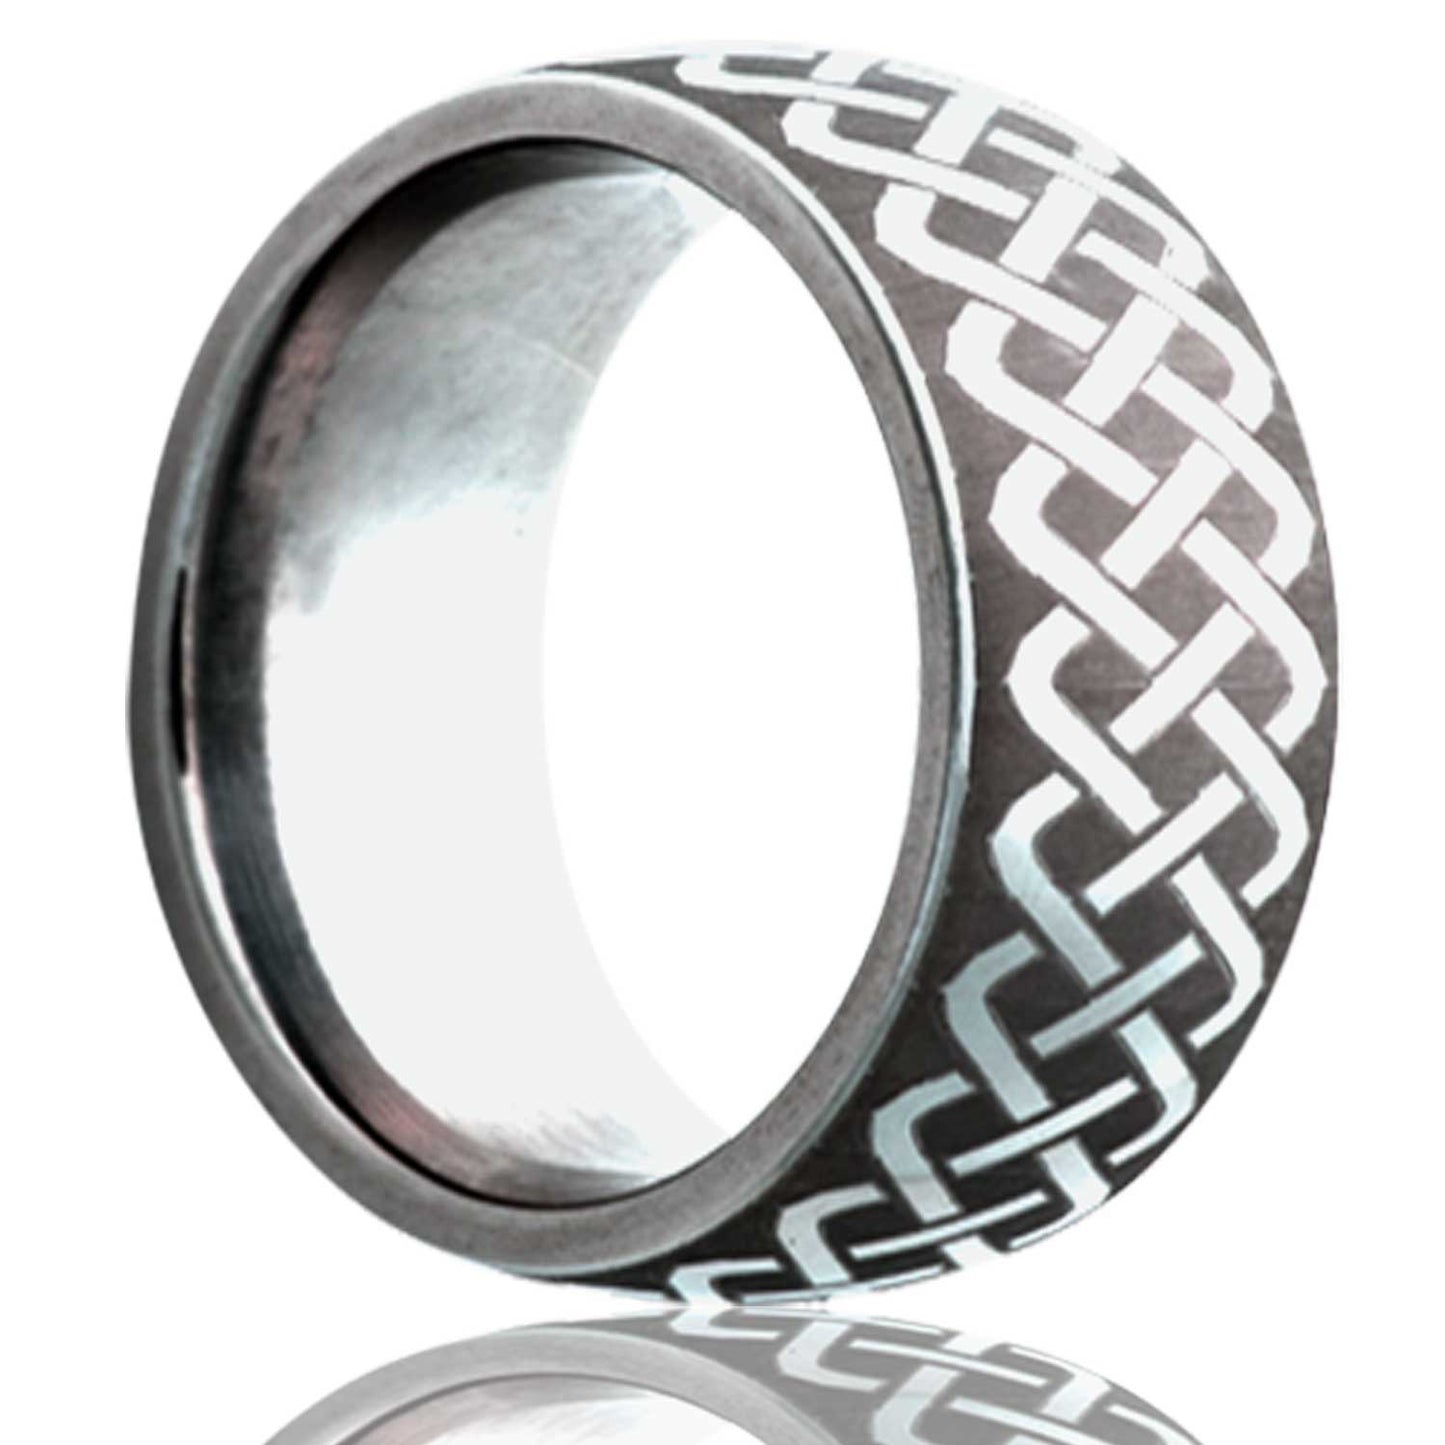 A celtic sailor's knot domed cobalt wedding band displayed on a neutral white background.